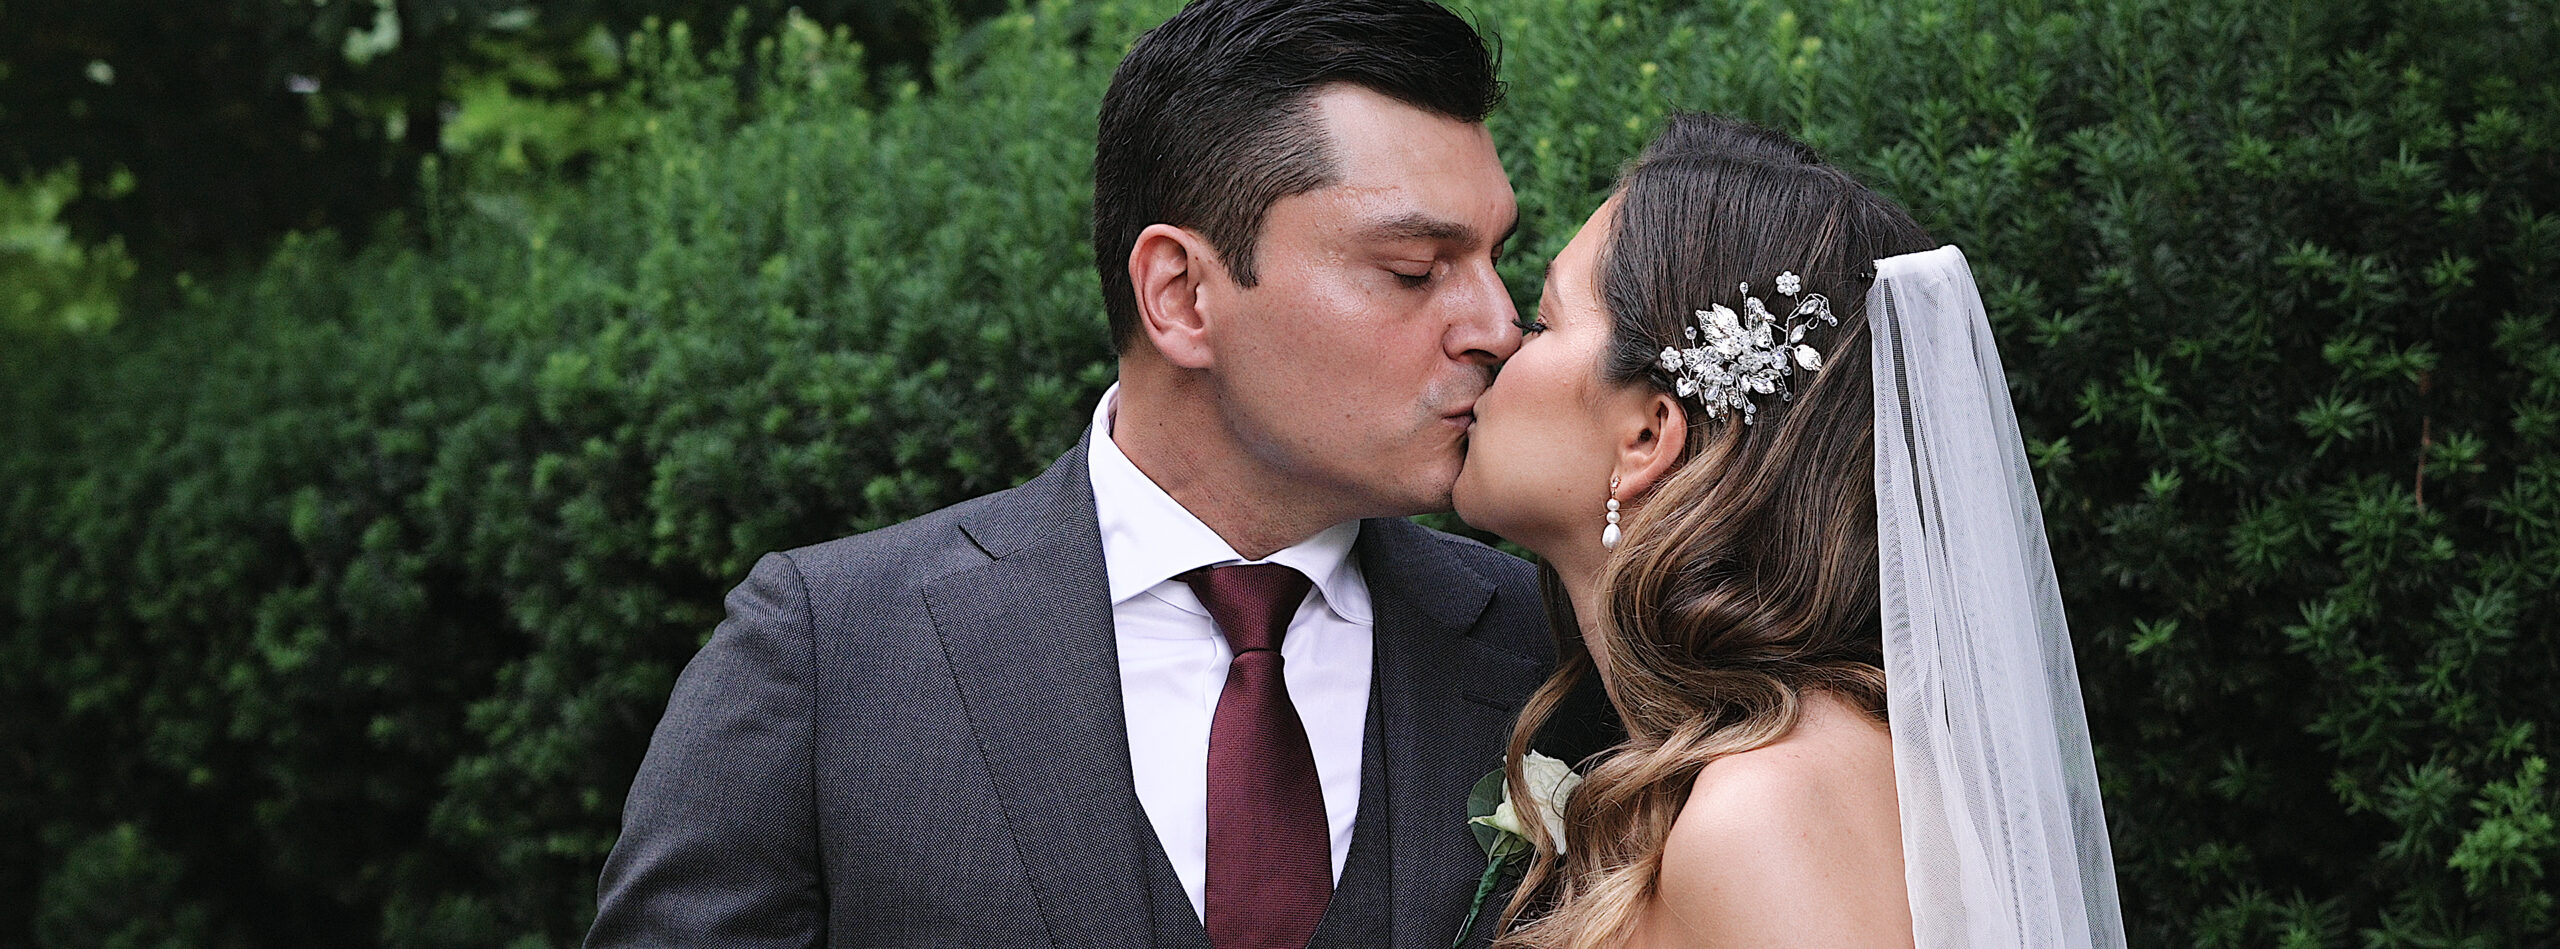 Couple standing in front of tall lush bushes kissing with their champagne glasses touching. Groom is wearing a form-fitted dark grey suit with a cranberry colored tie. Bride is wearing a strapless lace dress. She has a diamond covered hair clip over her left ear and is wearing a veil.